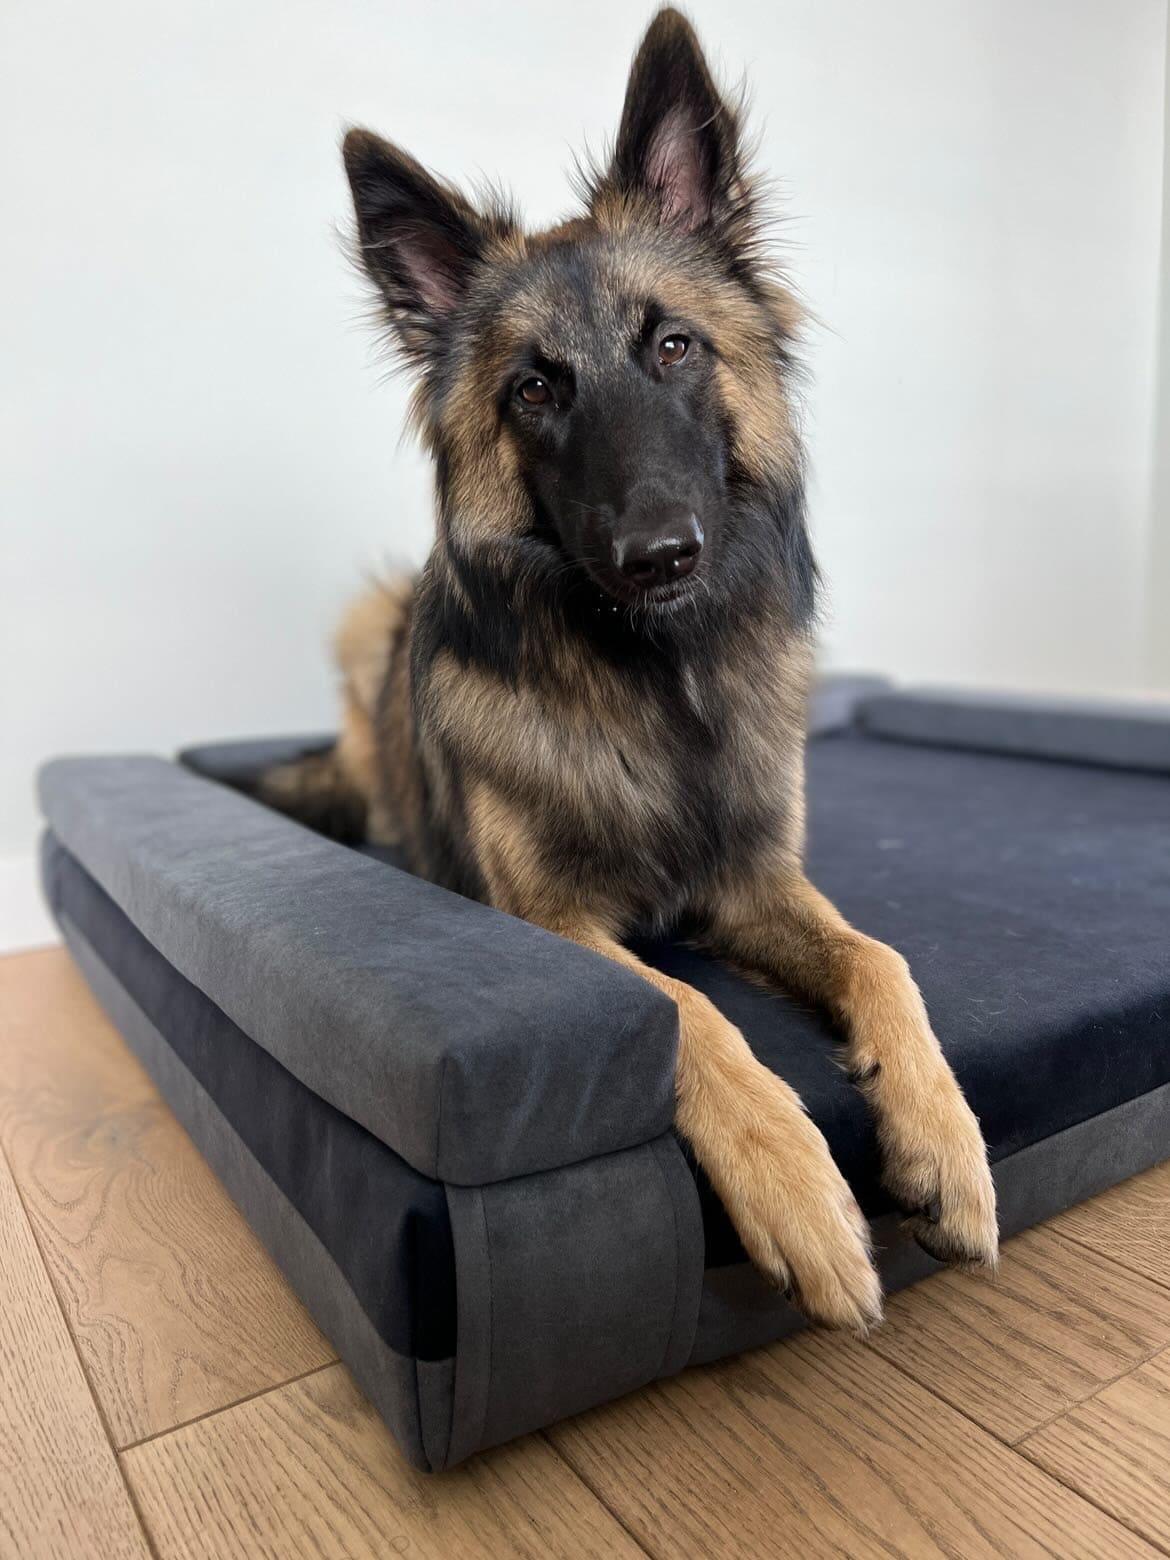 Transformer dog bed | Extra comfort & support | 2-sided | NAVY BLUE+CLOUD GREY - premium dog goods handmade in Europe by My Wild Other